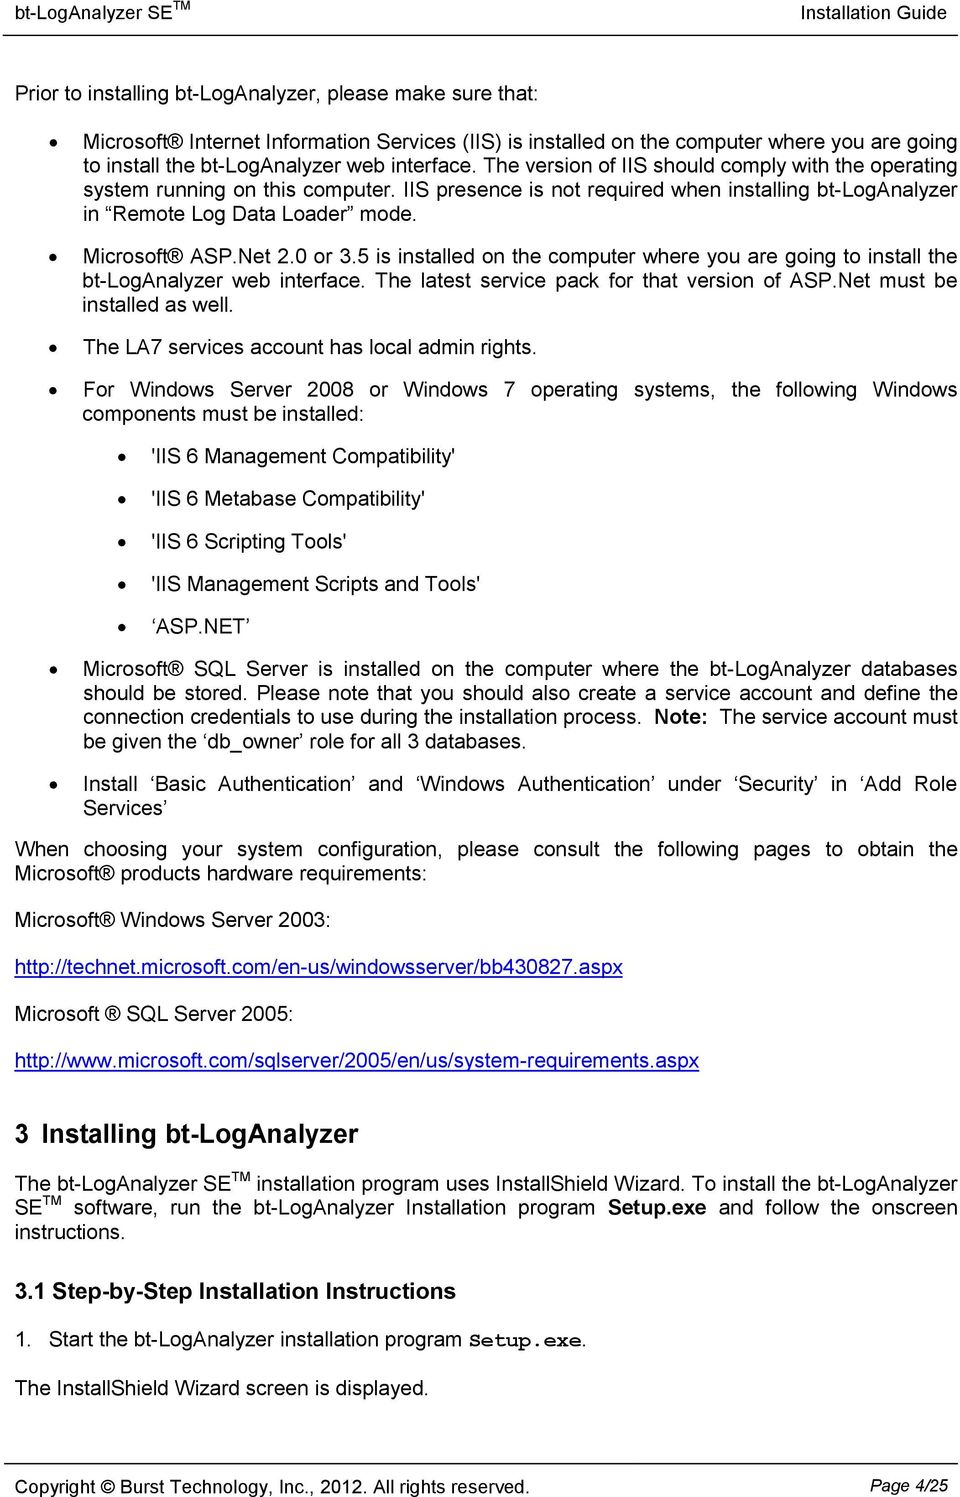 0 or 3.5 is installed on the computer where you are going to install the bt-loganalyzer web interface. The latest service pack for that version of ASP.Net must be installed as well.